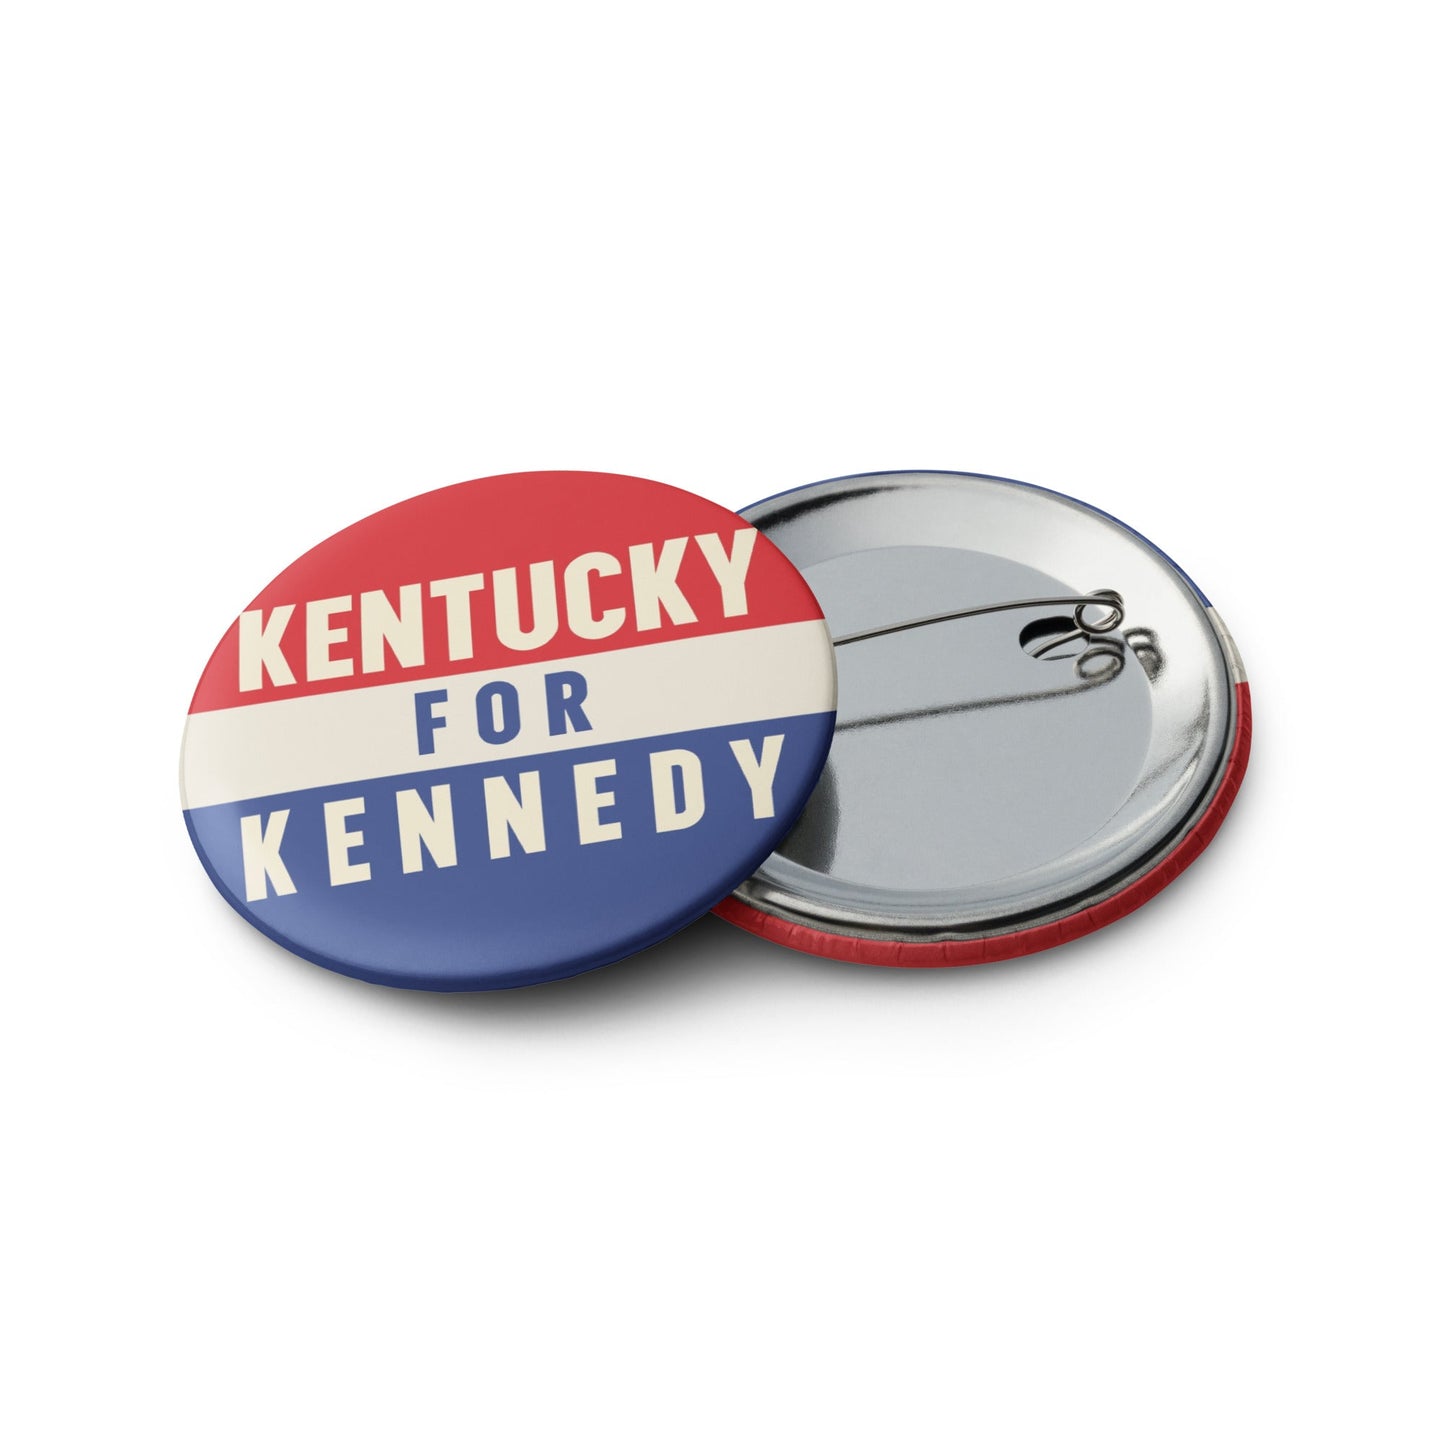 Kentucky for Kennedy (5 Buttons) - TEAM KENNEDY. All rights reserved